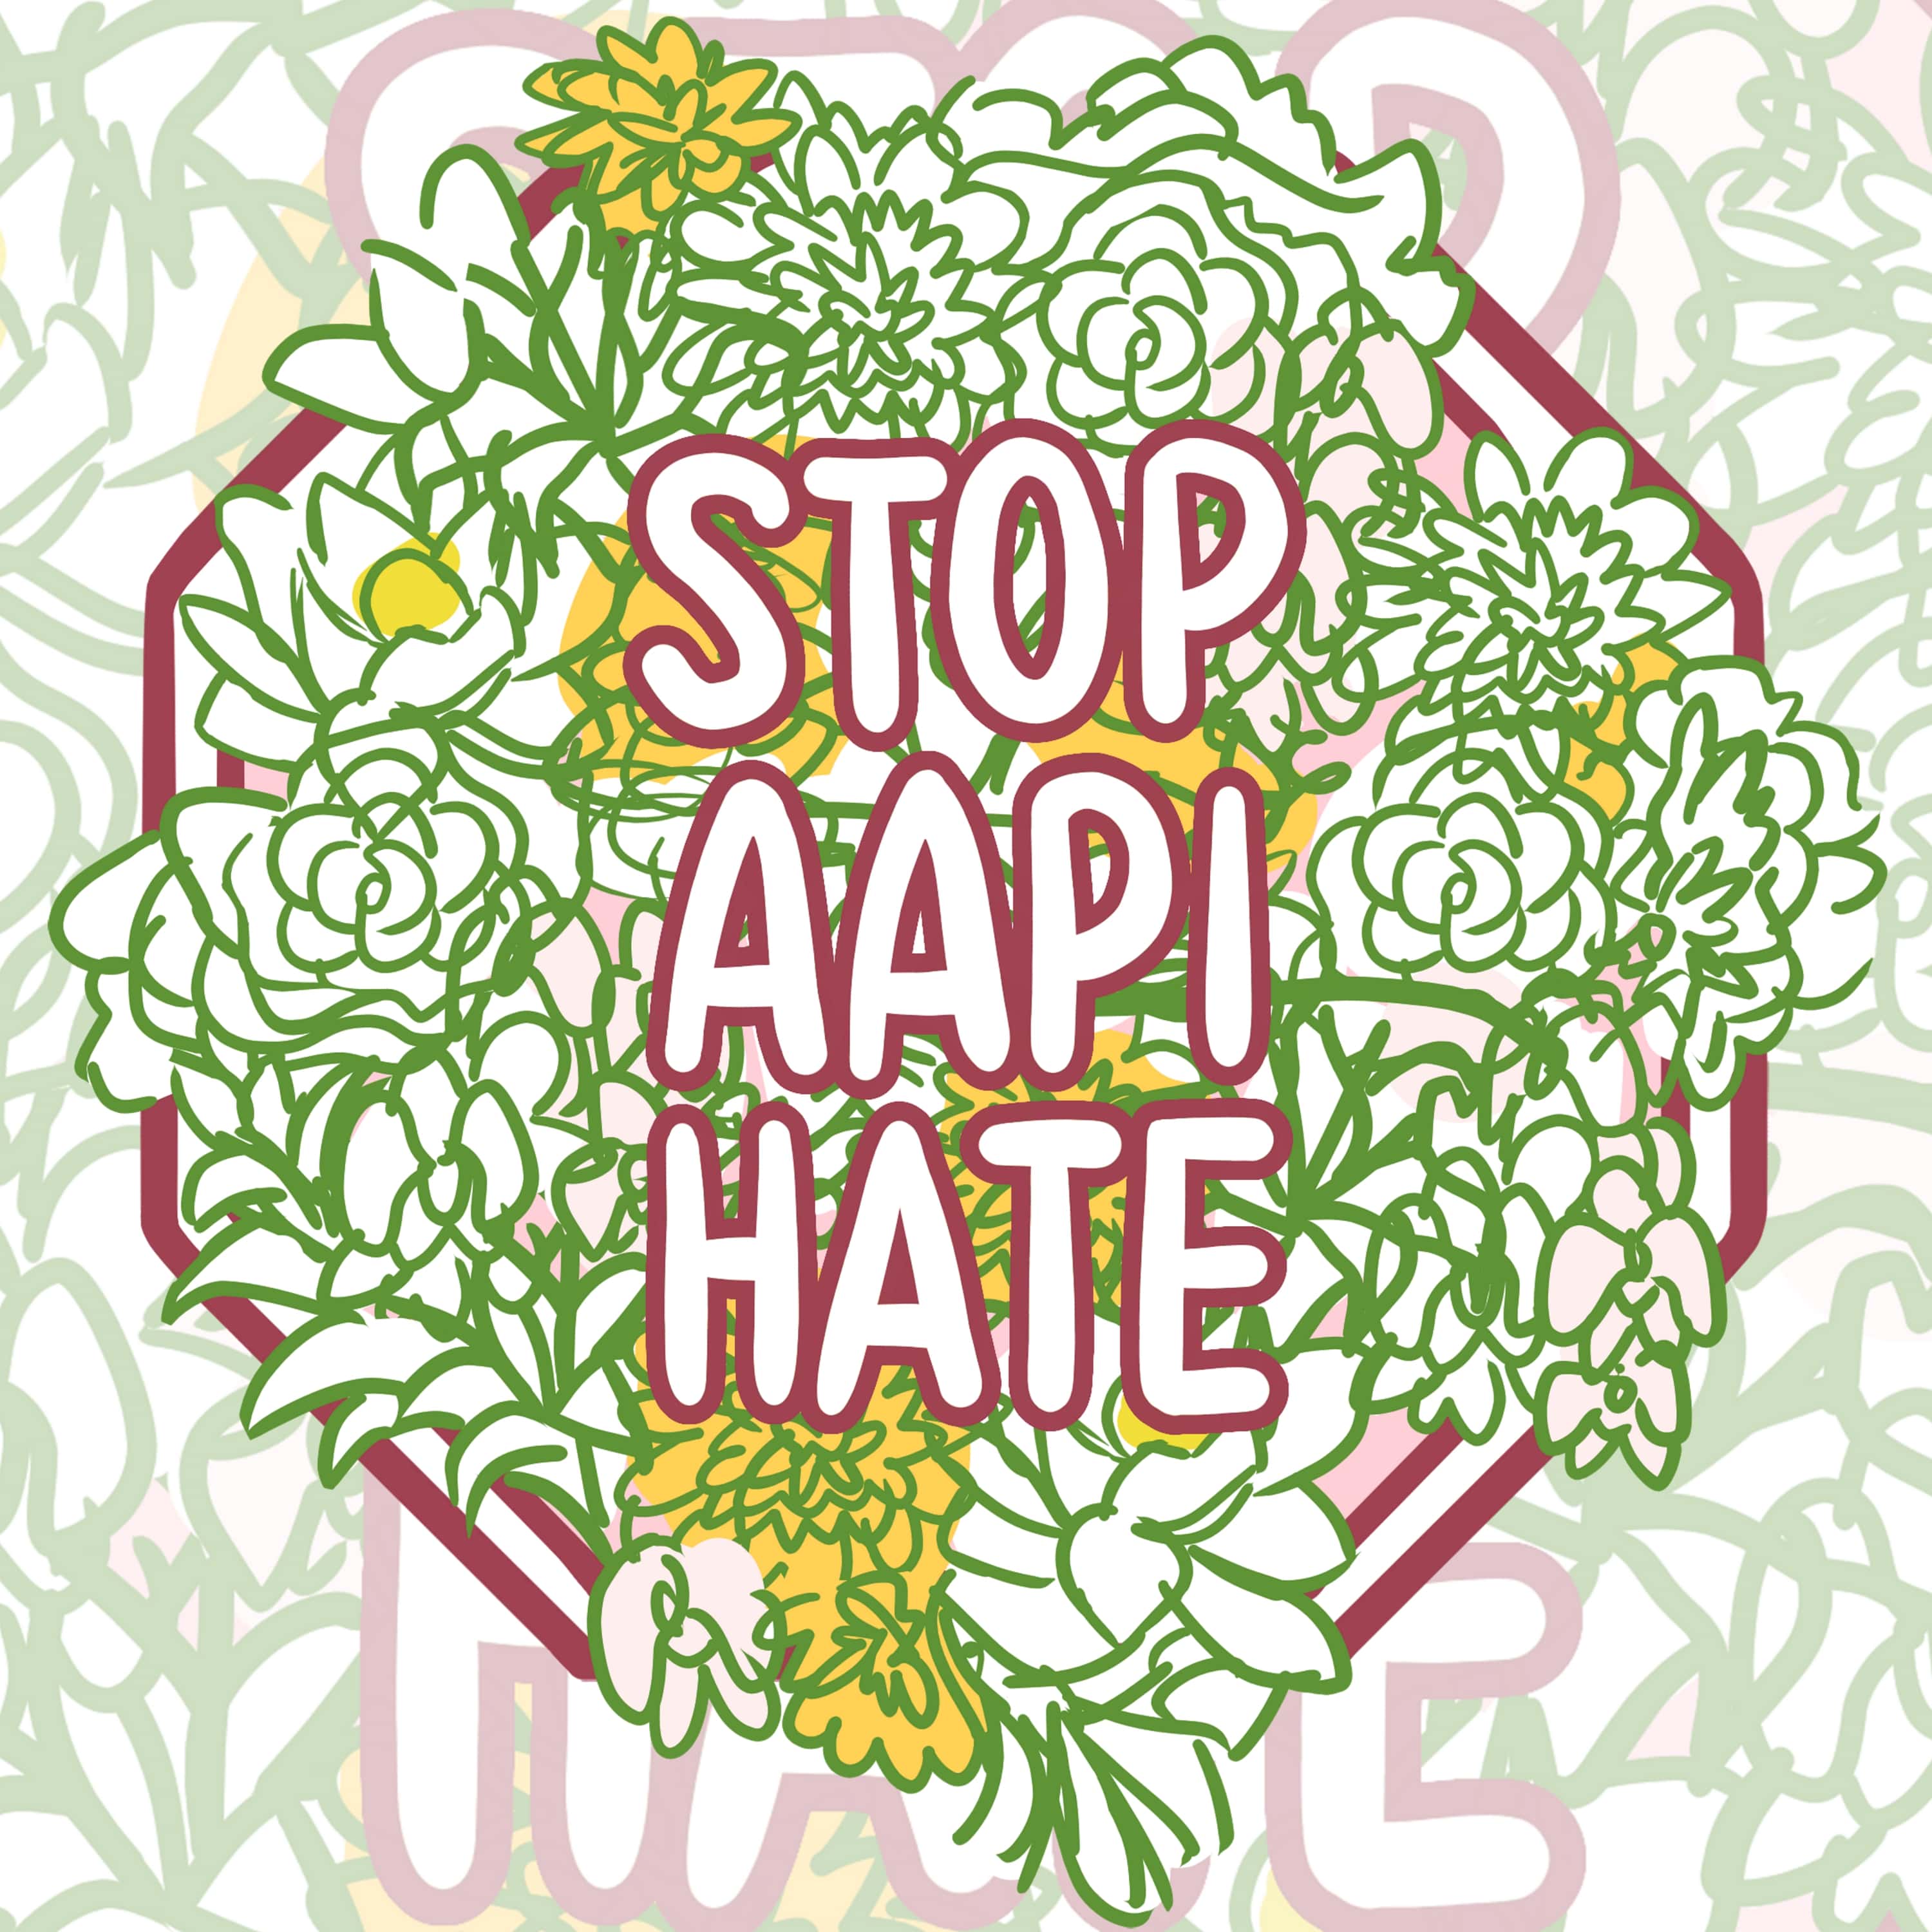 an illustrated sticker in the shape of a stop sign that says 'Stop AAPI Hate'; the background are white, yellow and pink funeral flowers common in some AAPI funeral traditions